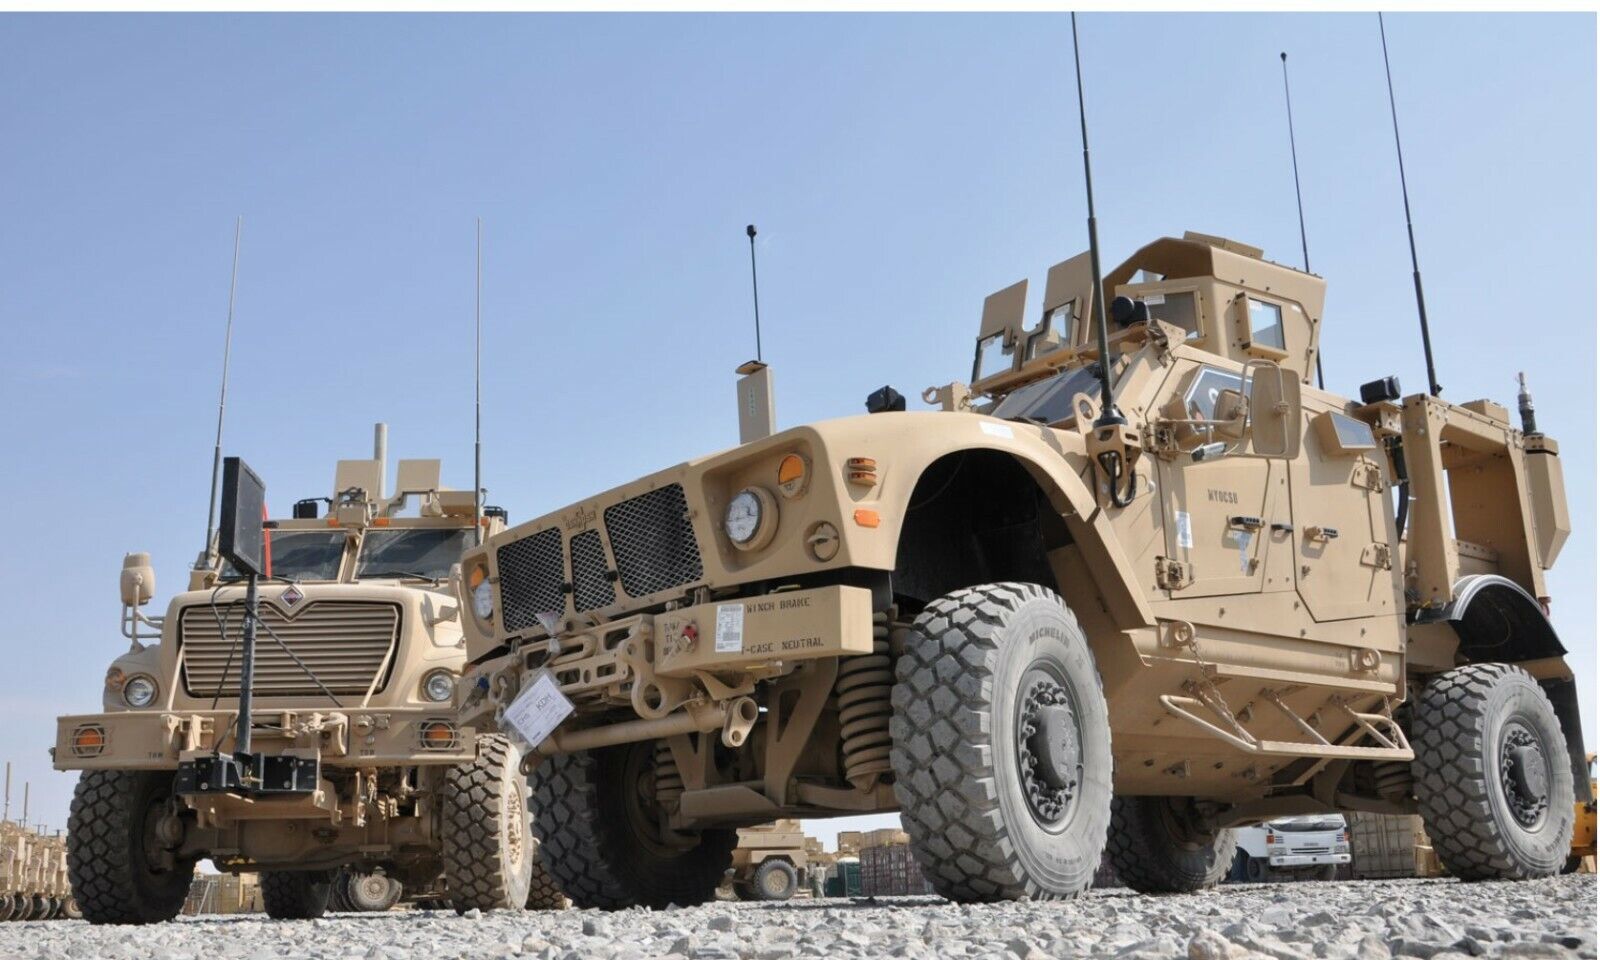 HOLD OPEN, DOOR STOP MRAP & OTHER MILITARY VEHICLES [A0FL]